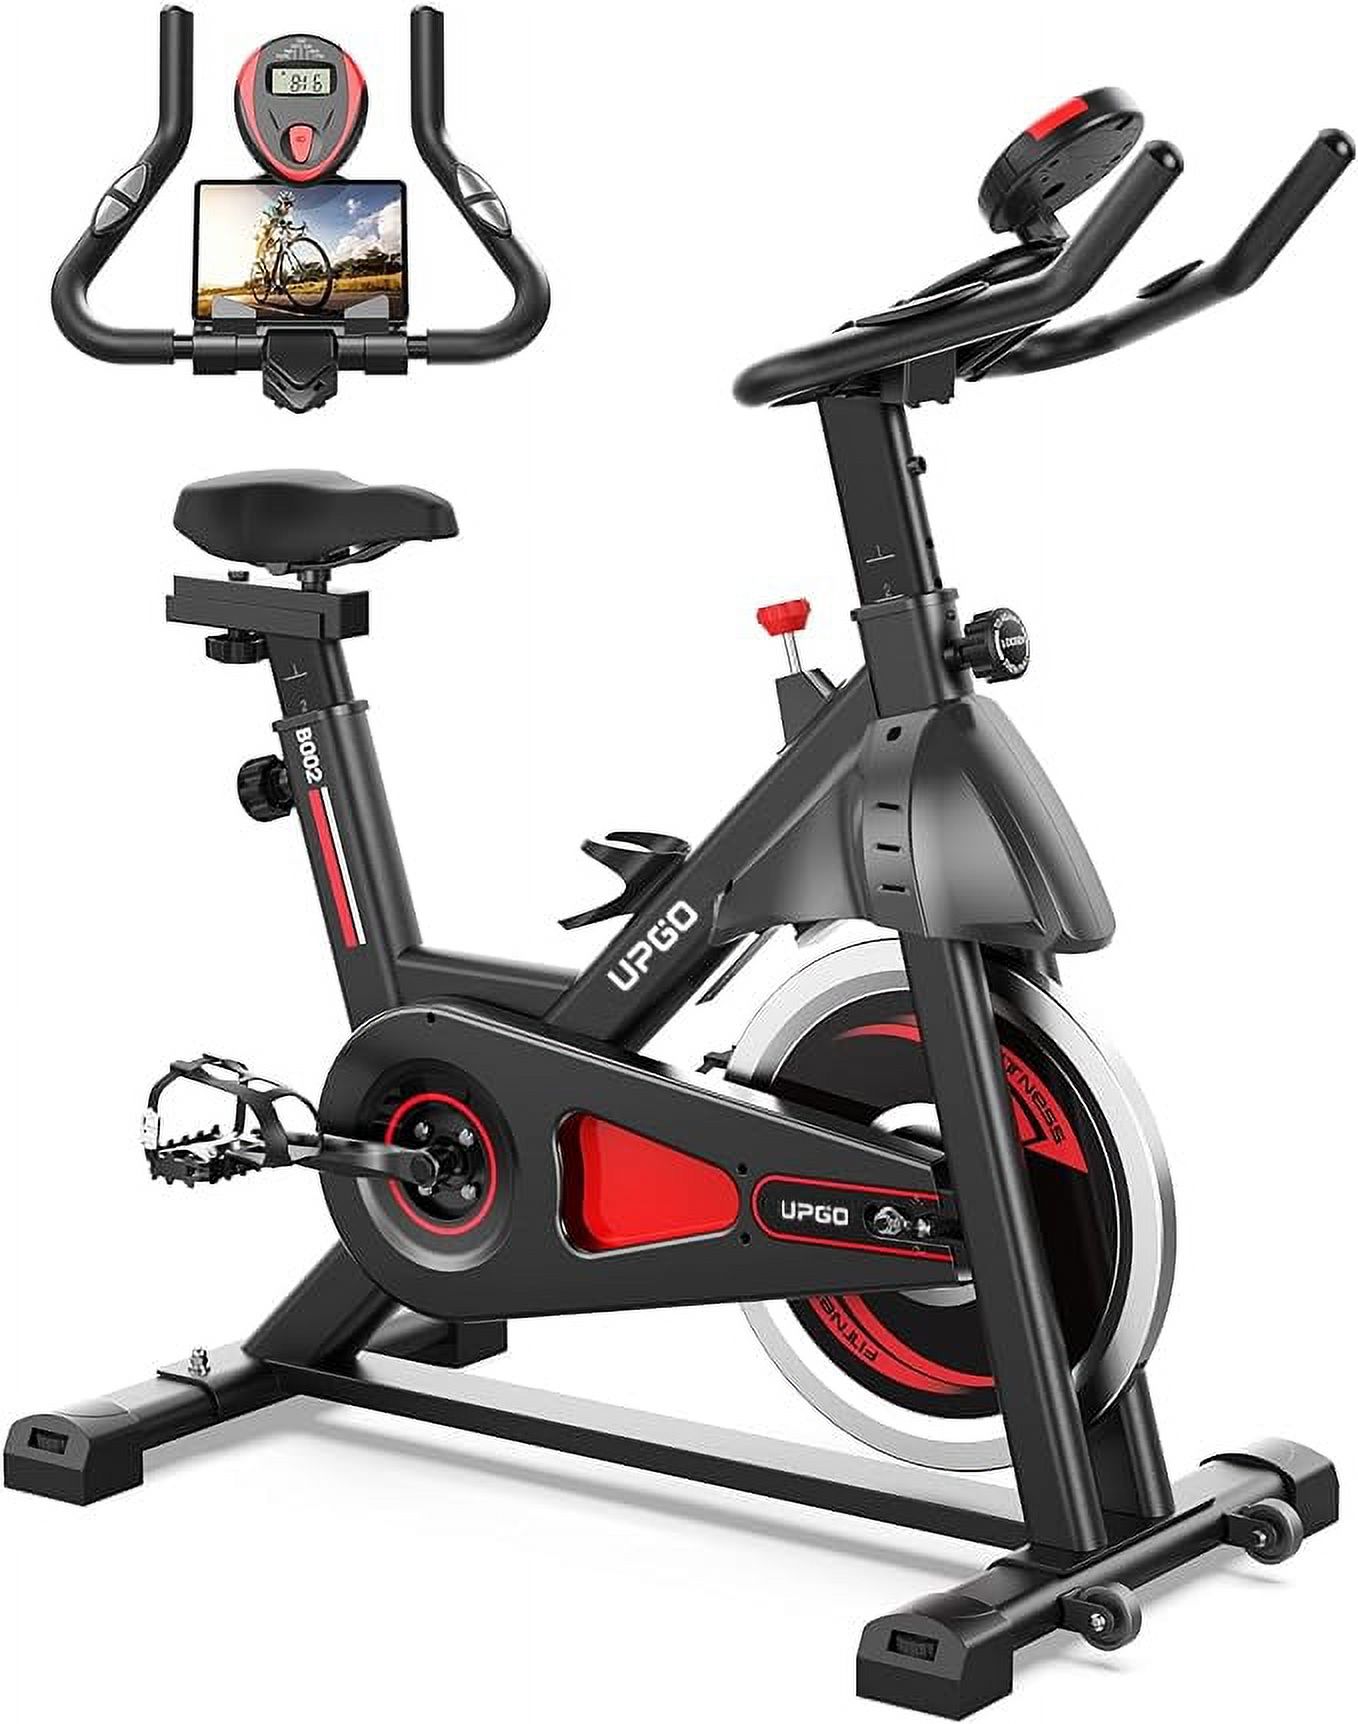 UPGO Exercise Bike-Stationary Indoor Cycling Bike for Home 270 Lbs Weight Capacity, Comfortable Seat Cushion and iPad Holder Red - image 1 of 7